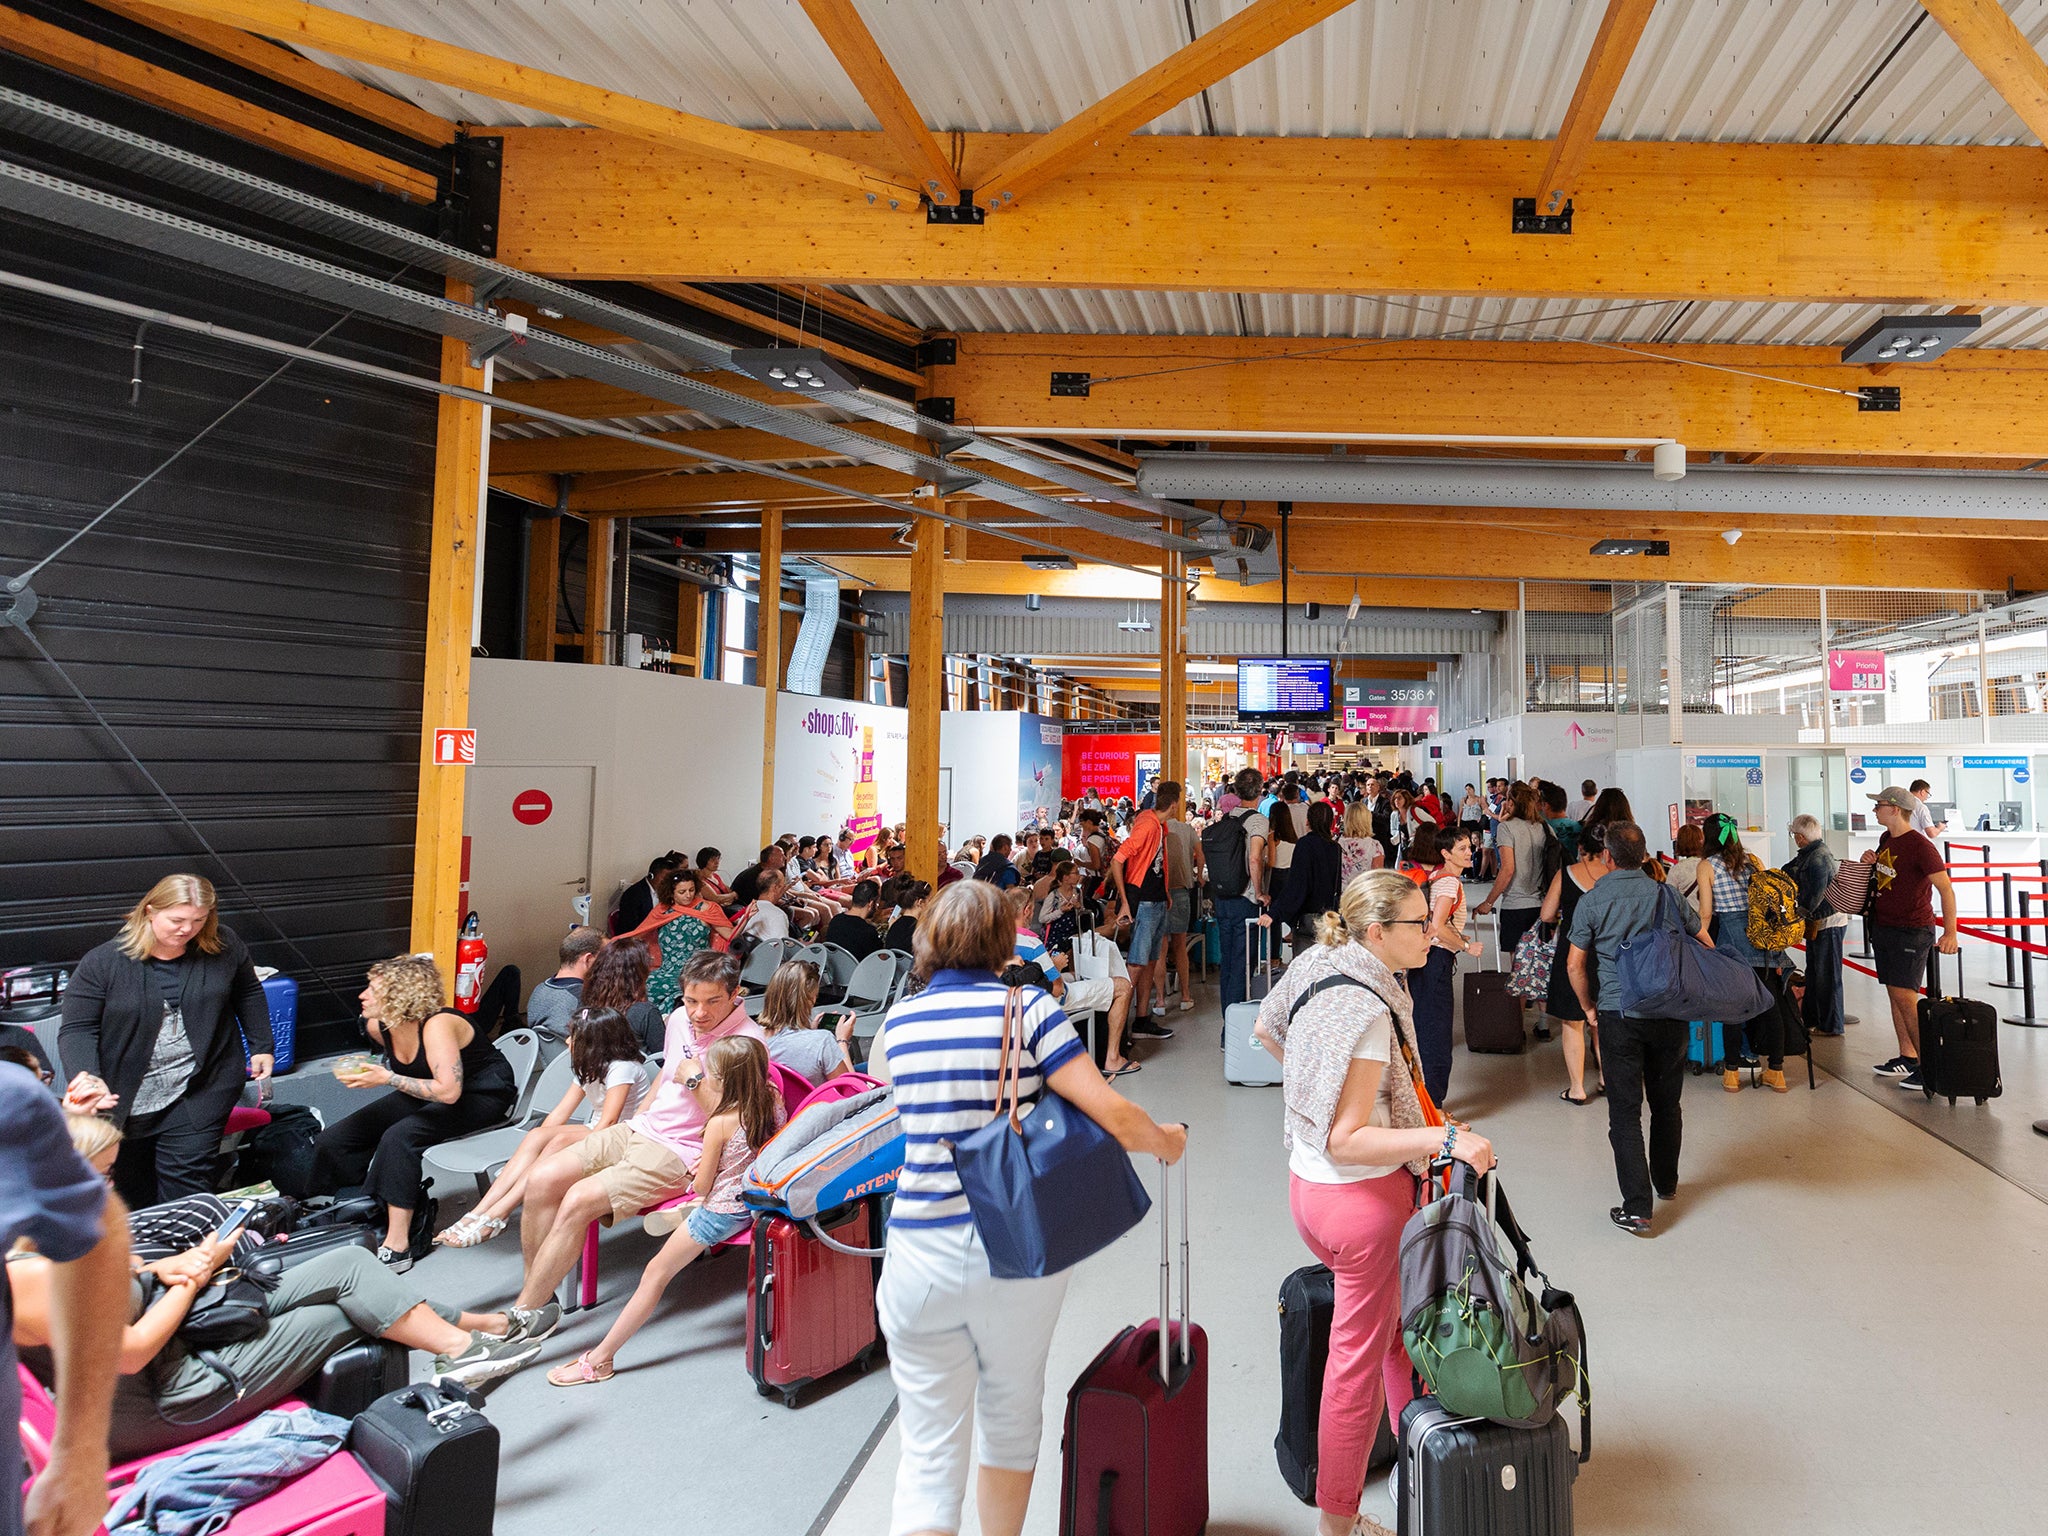 Shed-like terminals are common in Europe, and they’re not all bad, says Simon